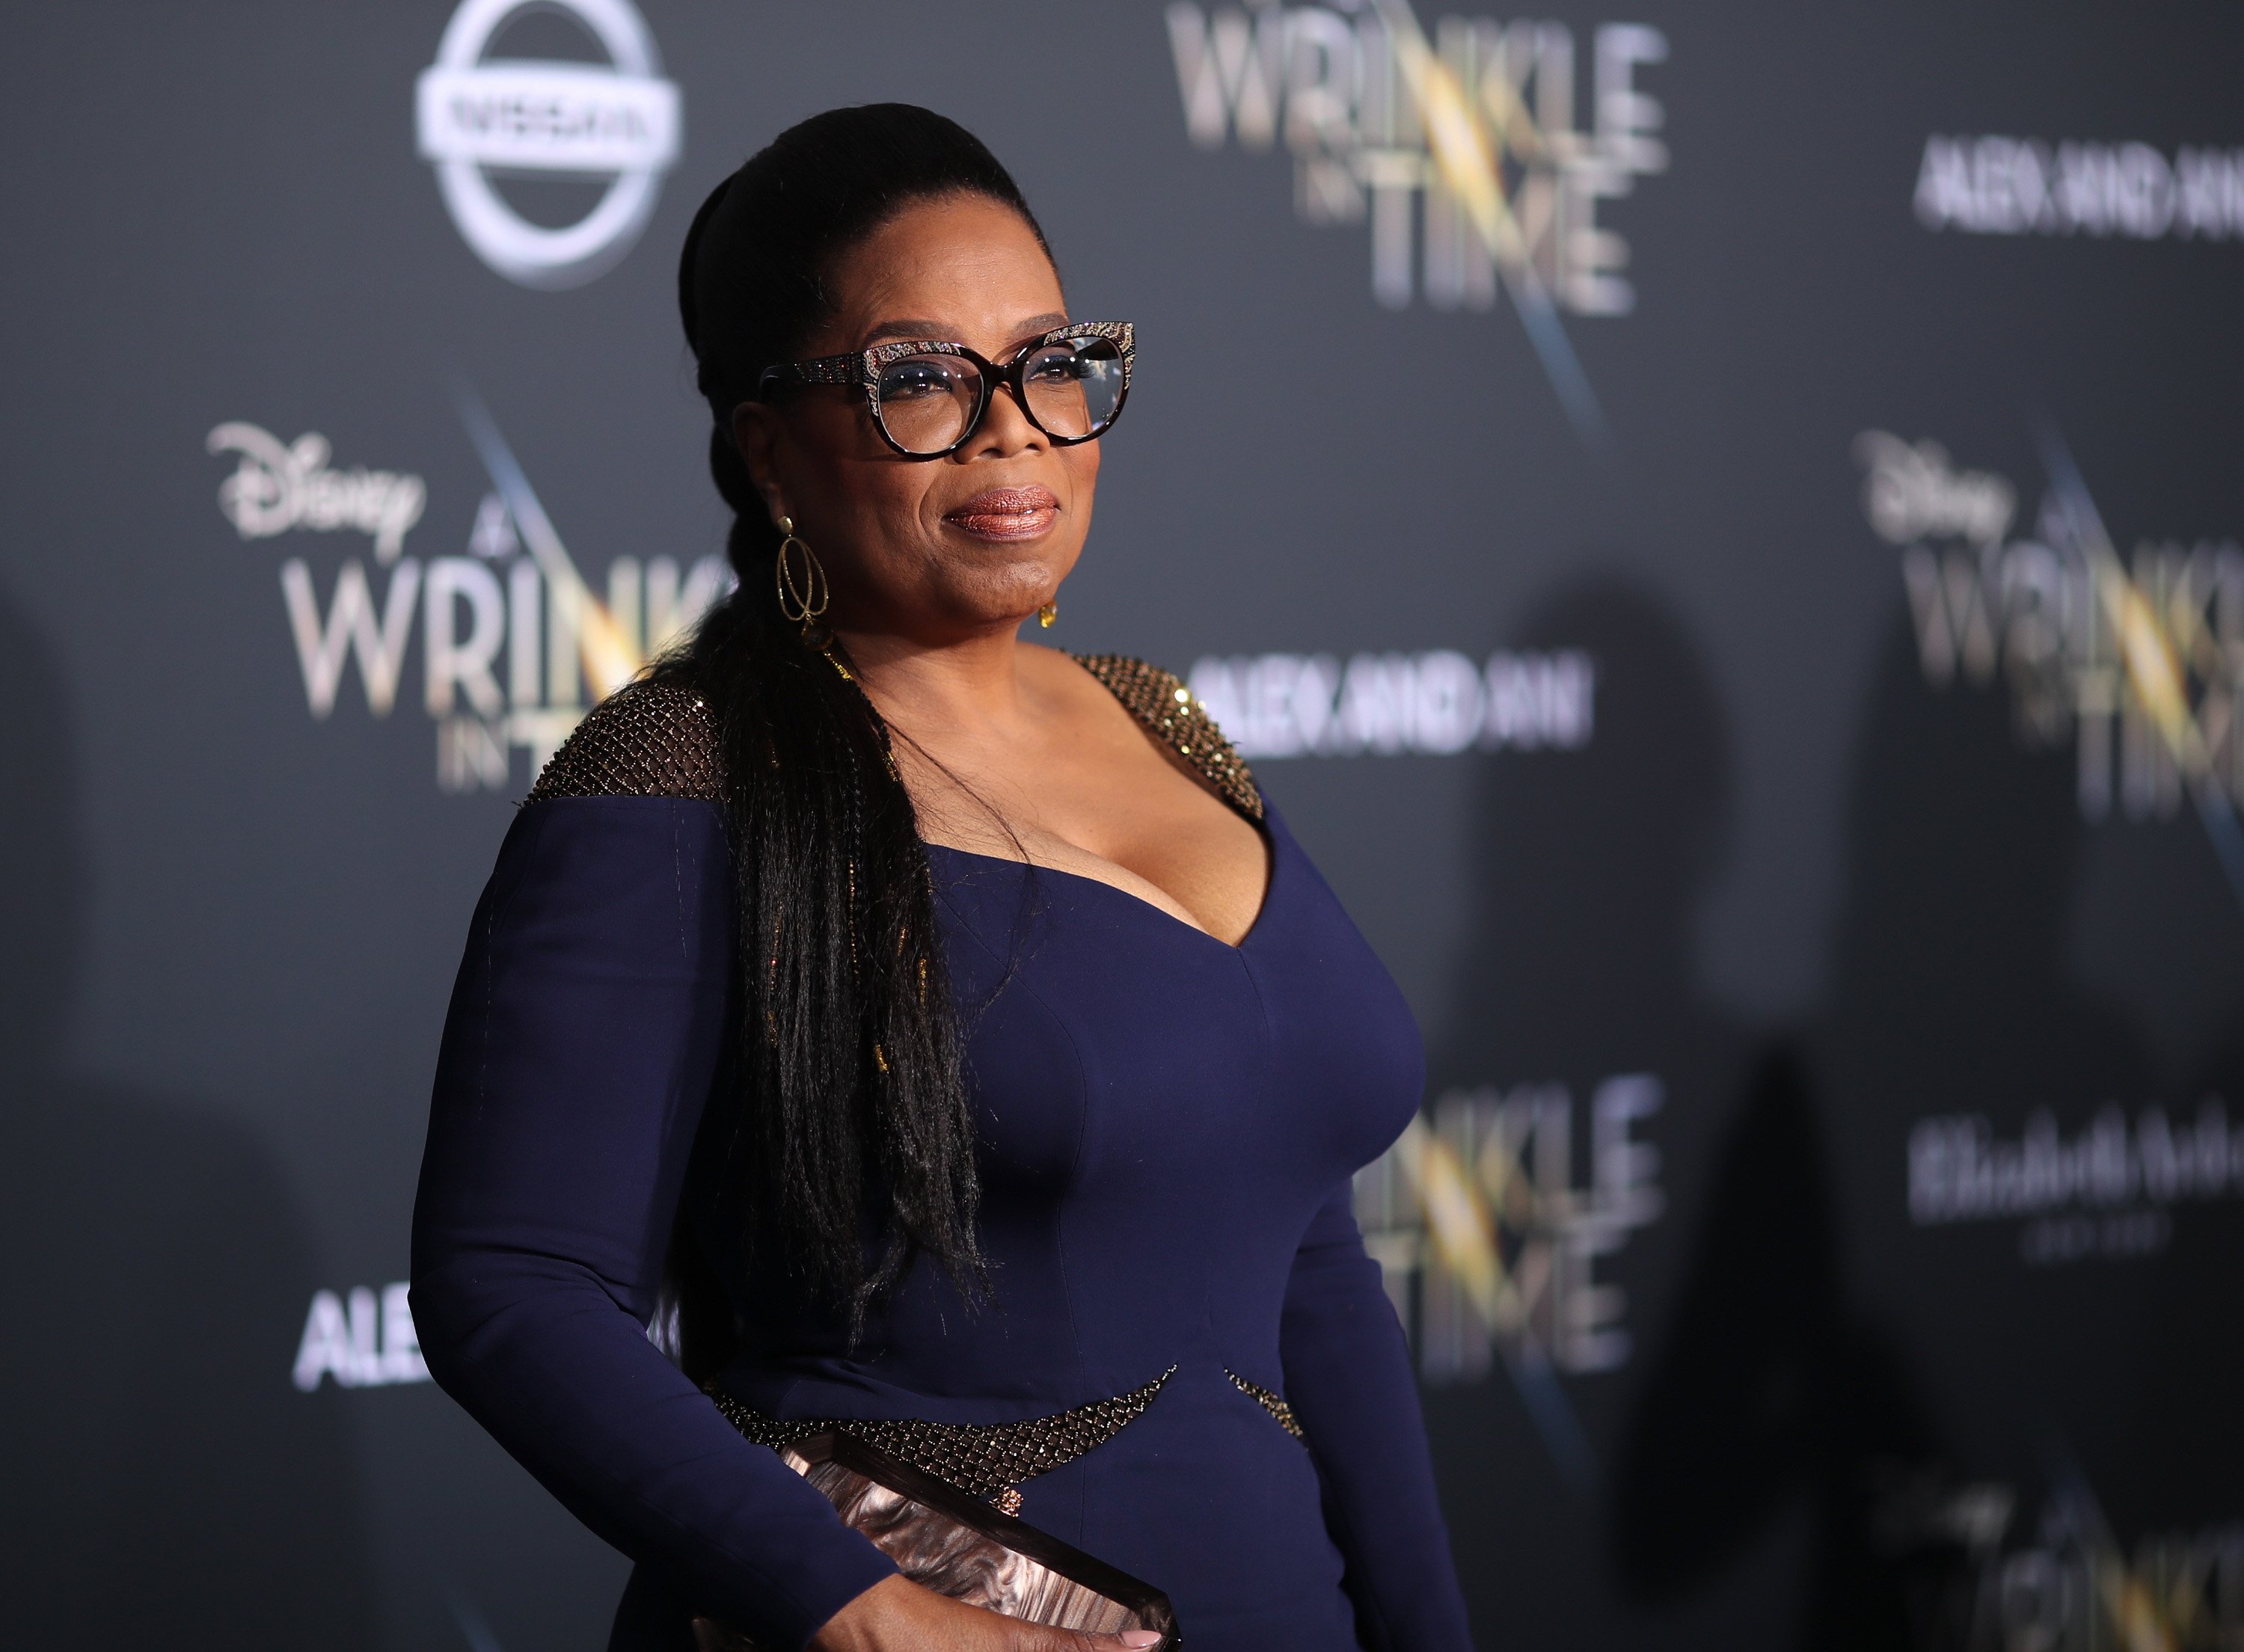 Oprah Winfrey attends the premiere of Disney's "A Wrinkle In Time" at the El Capitan Theatre on February 26, 2018. | Photo: Getty Images